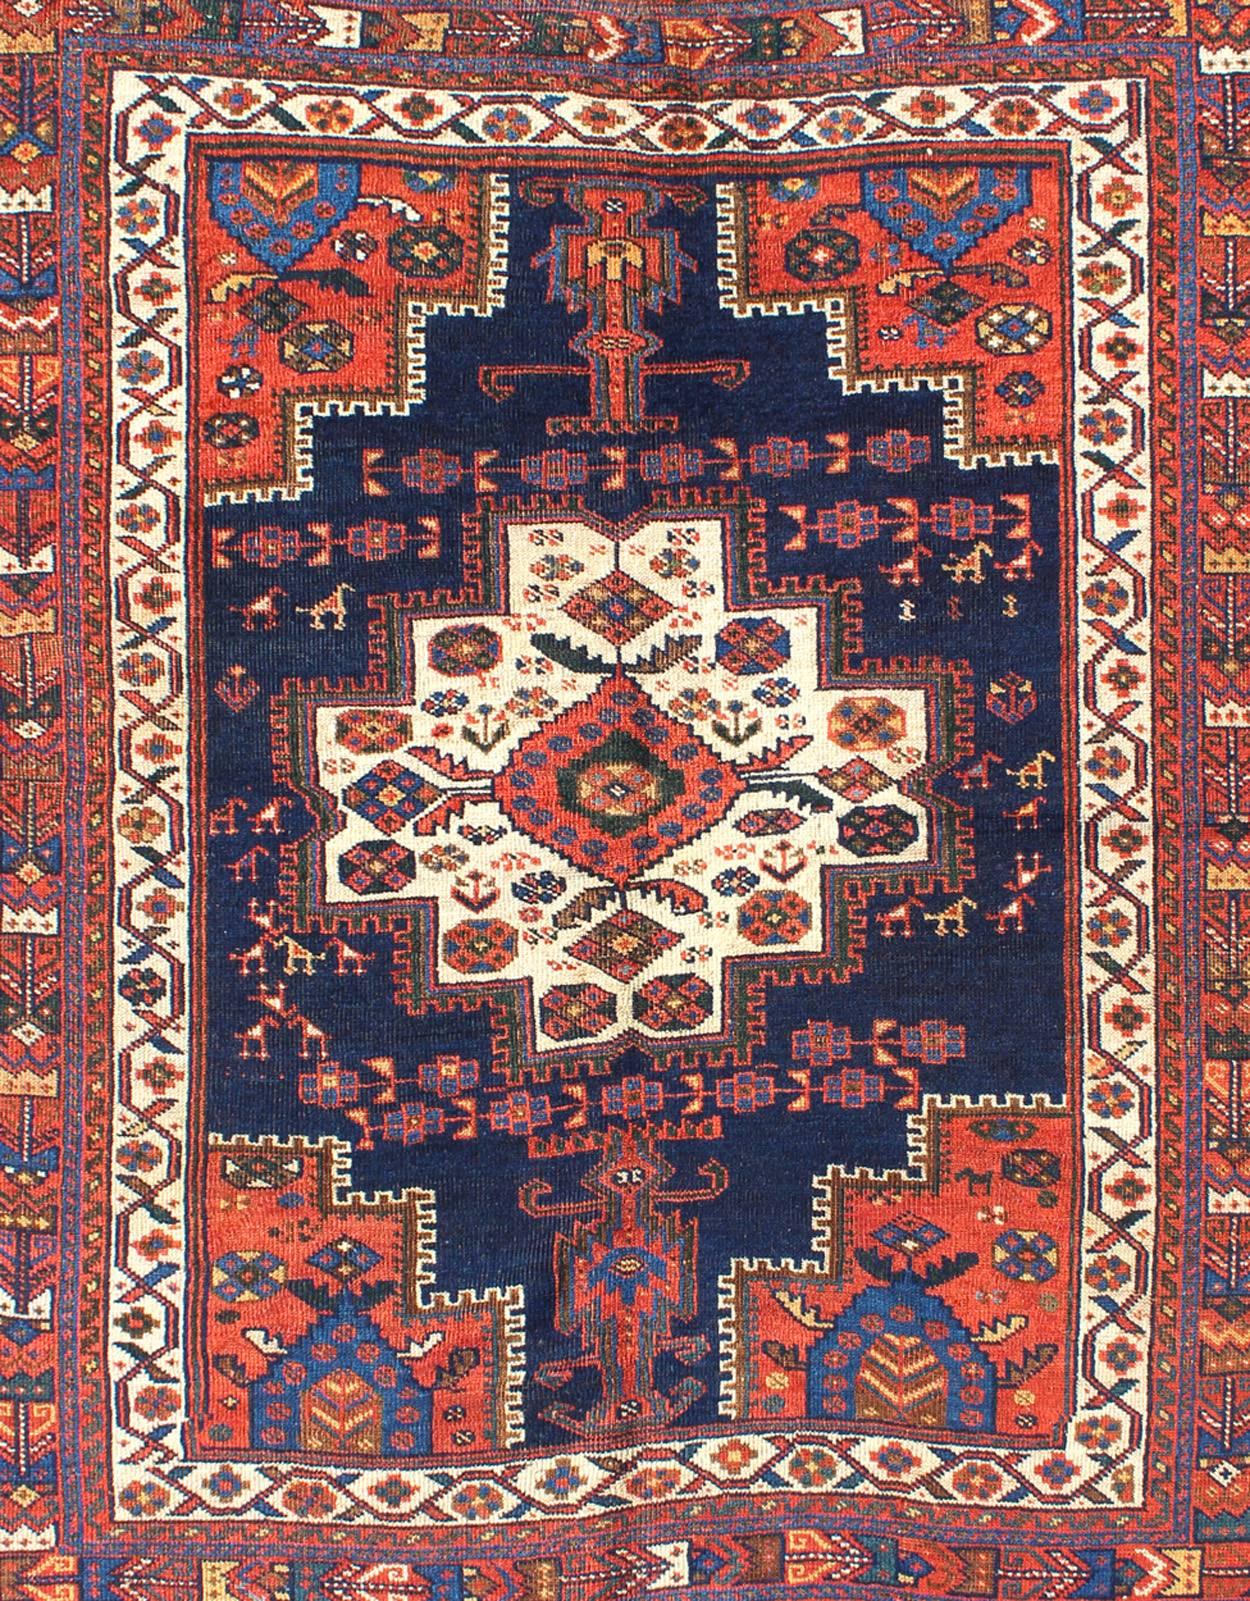 Tribal Antique Persian Afshar Carpet with Stylized Chrysanthemums and Vase Design